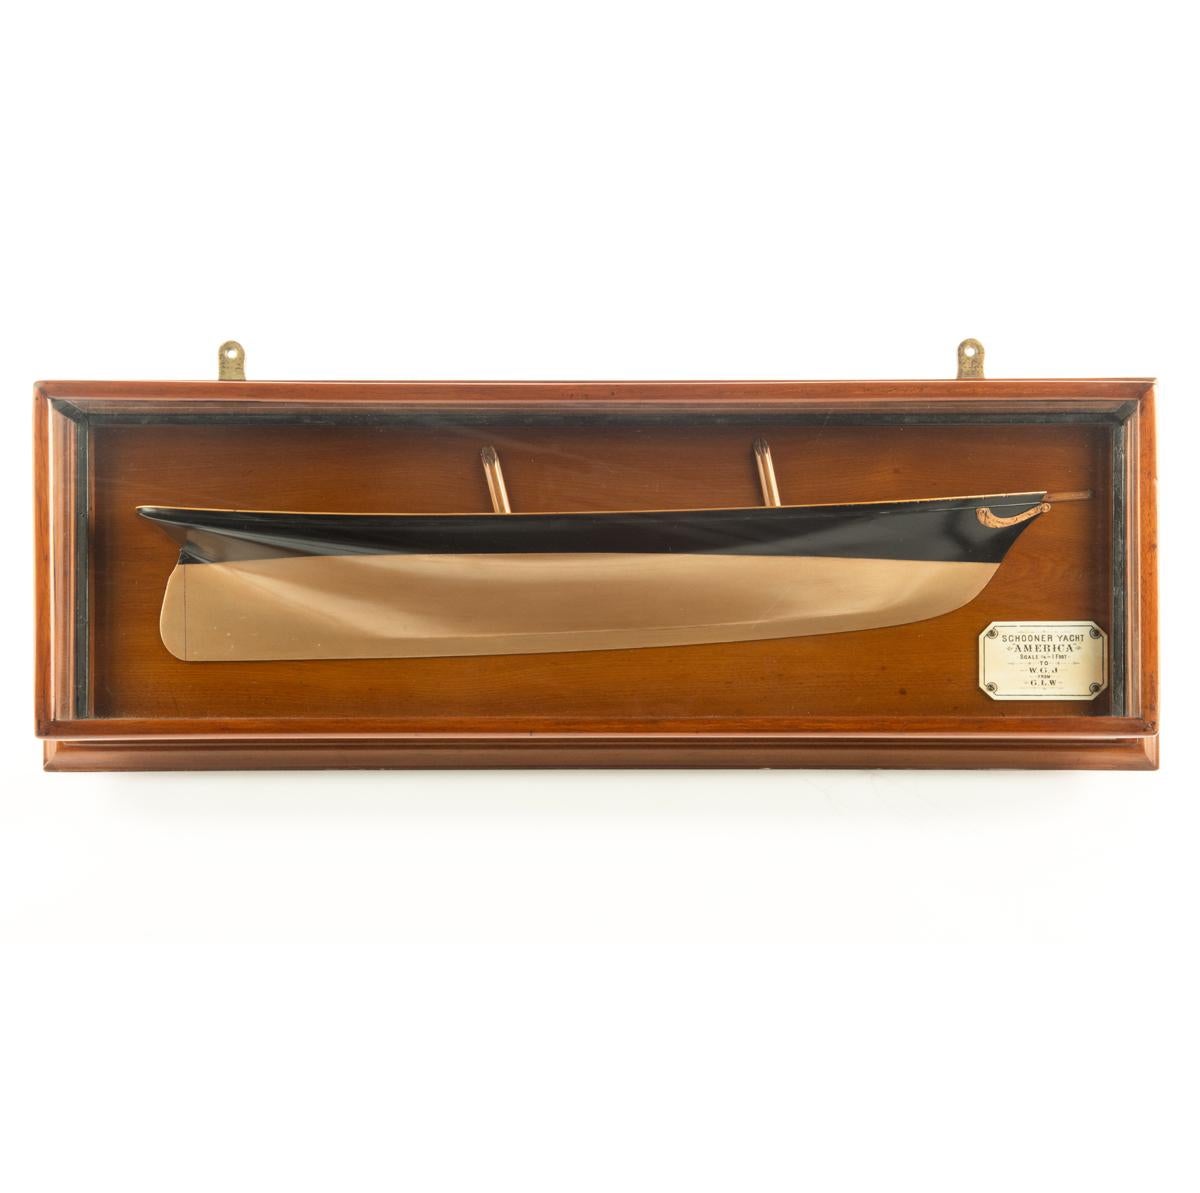 This cased presentation half hull model is of the first winner of the America’s Cup, the schooner America. The copper coloured bottom is painted with black topsides and has a finely carved garland around the bow. There are two stump masts, a caprail